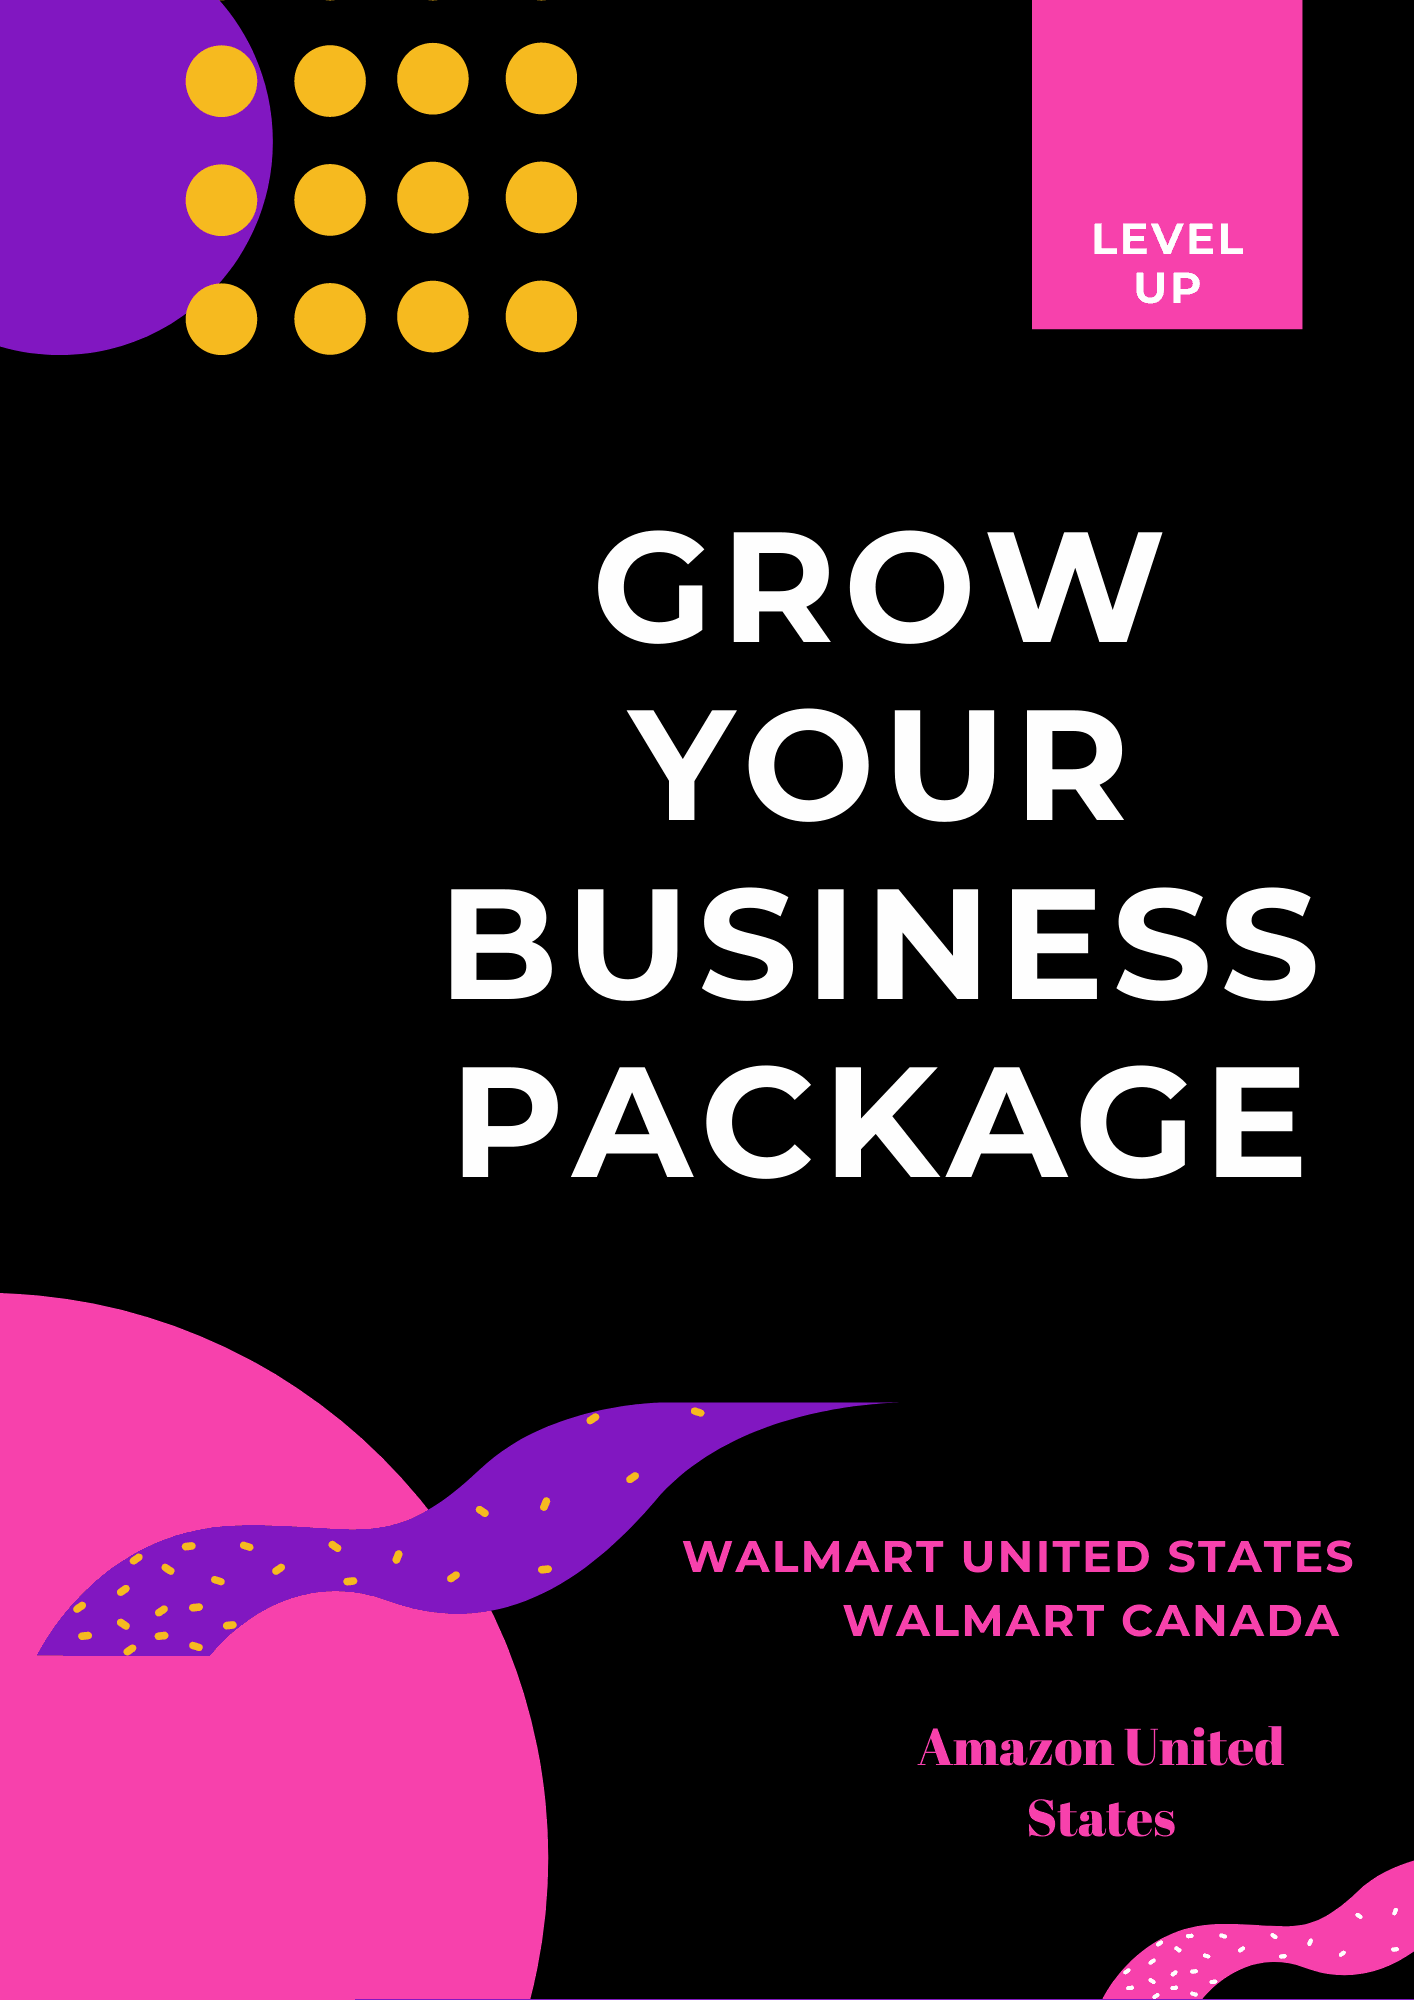 Grow Your Business on Walmart and Amazon Package - Ebony's Beauty Hair and Skin Care LLC